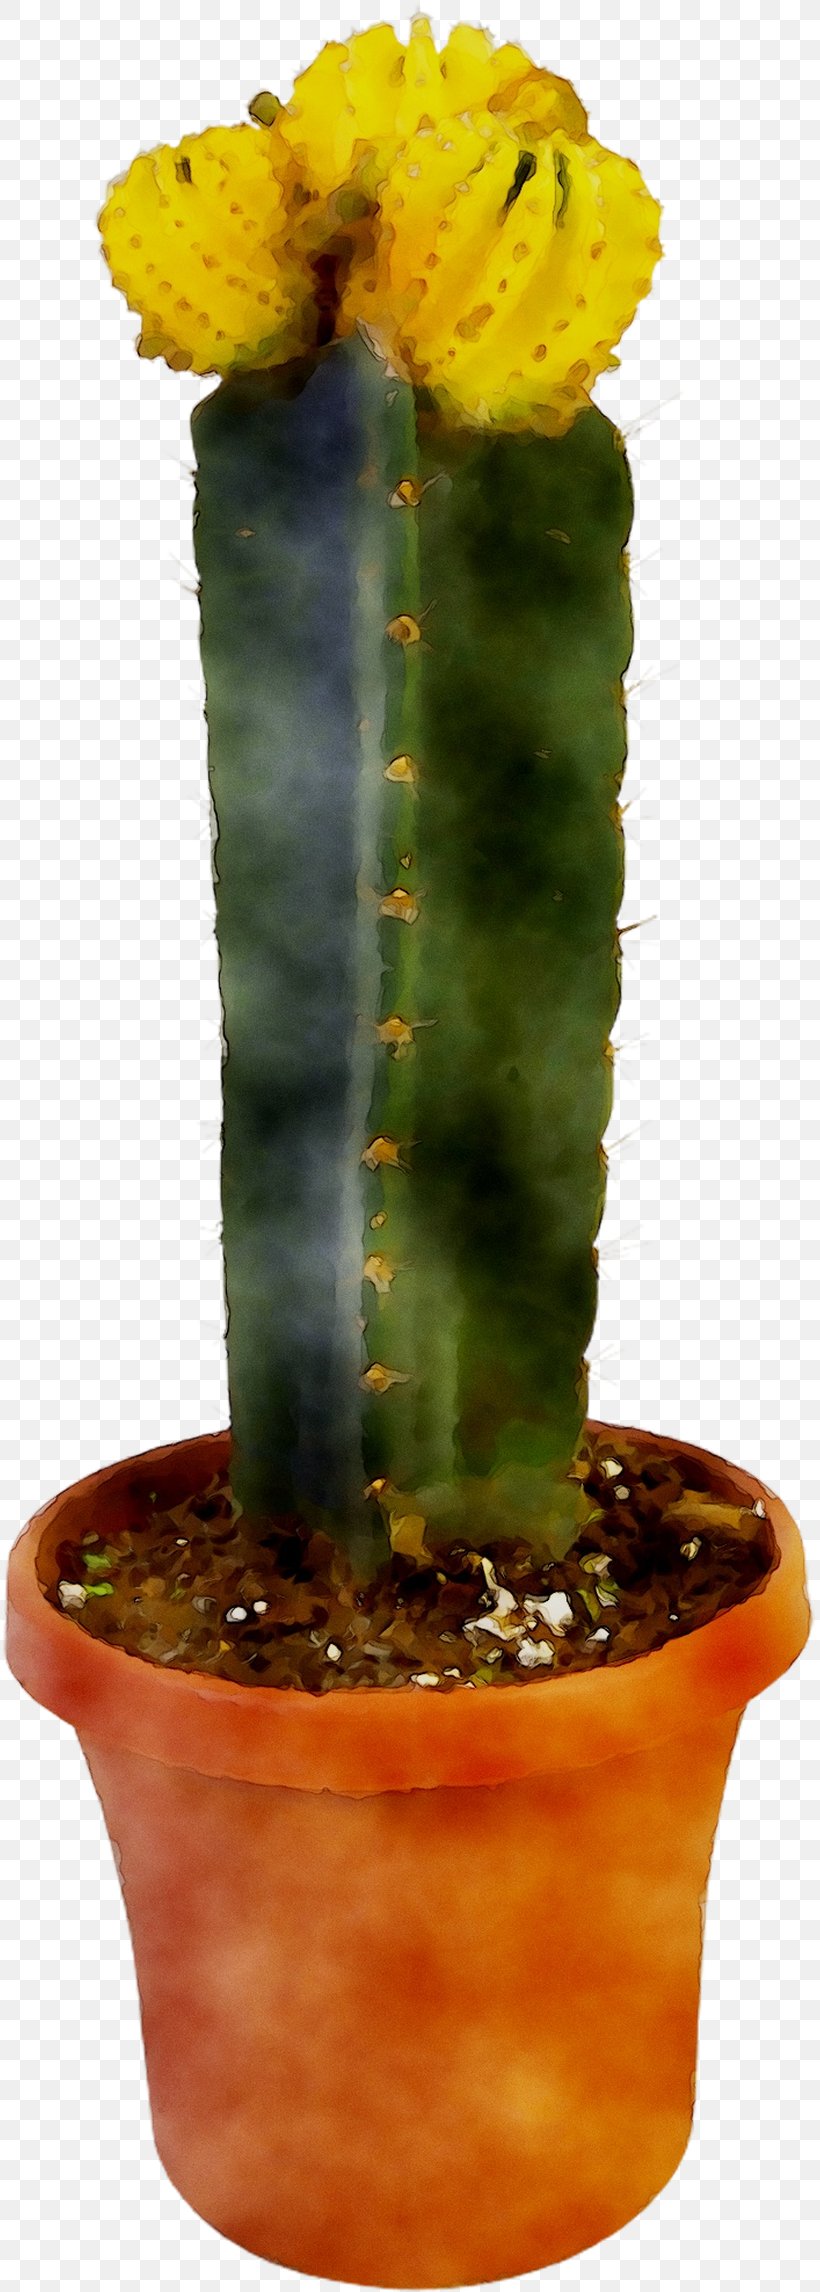 Eastern Prickly Pear Triangle Cactus Echinocereus Plant Stem, PNG, 815x2292px, Eastern Prickly Pear, Acanthocereus, Acanthocereus Tetragonus, Cactus, Caryophyllales Download Free